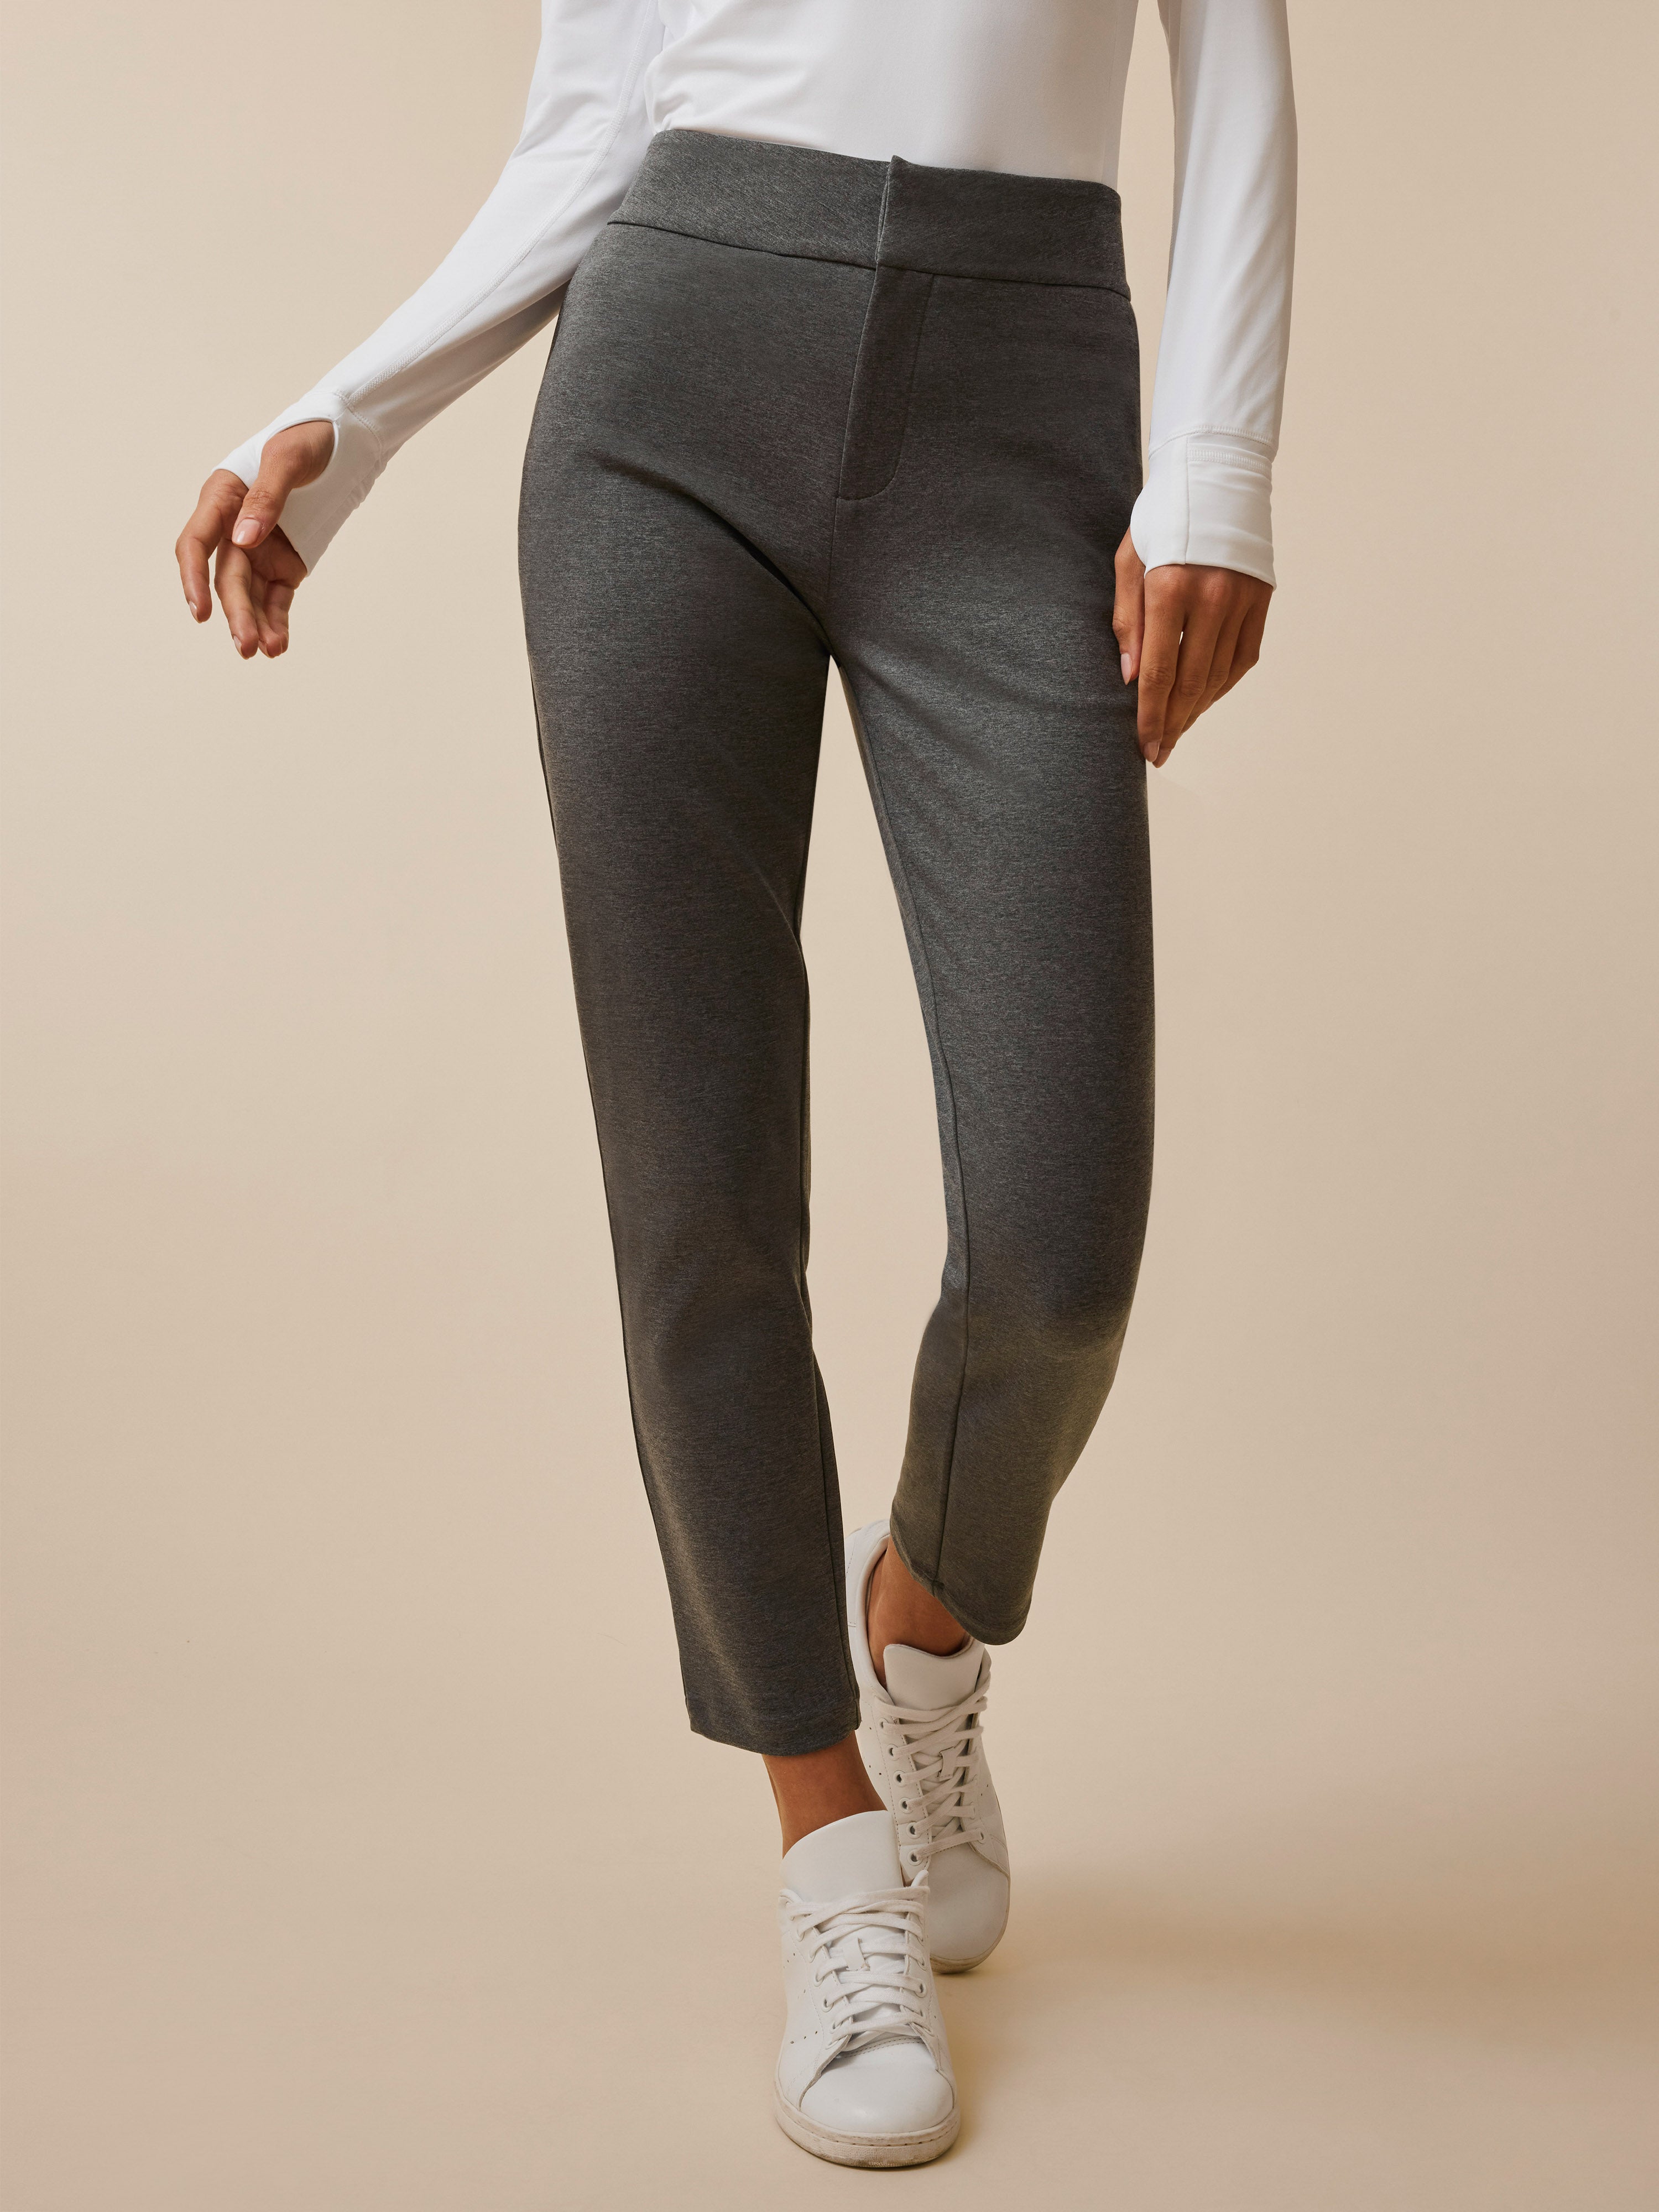 Seymour Classic Cropped Pants | Women's Pants – Kit and Ace